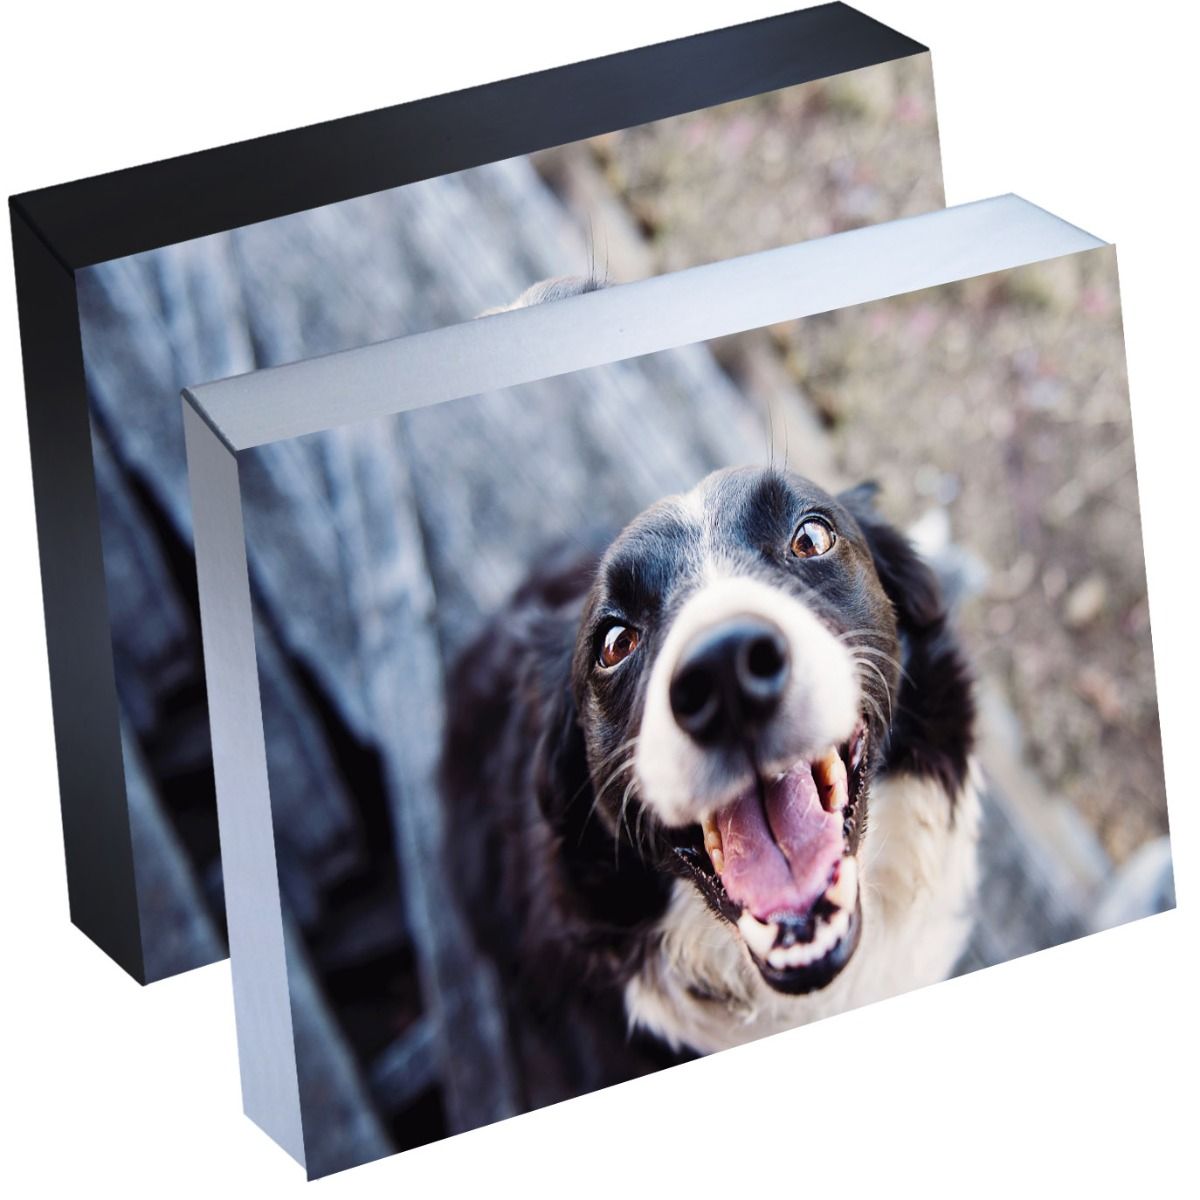 6" x 8" Silver Linings™ Peel-and-Stick Photo Block Frames, Choose from Silver or Black Edge